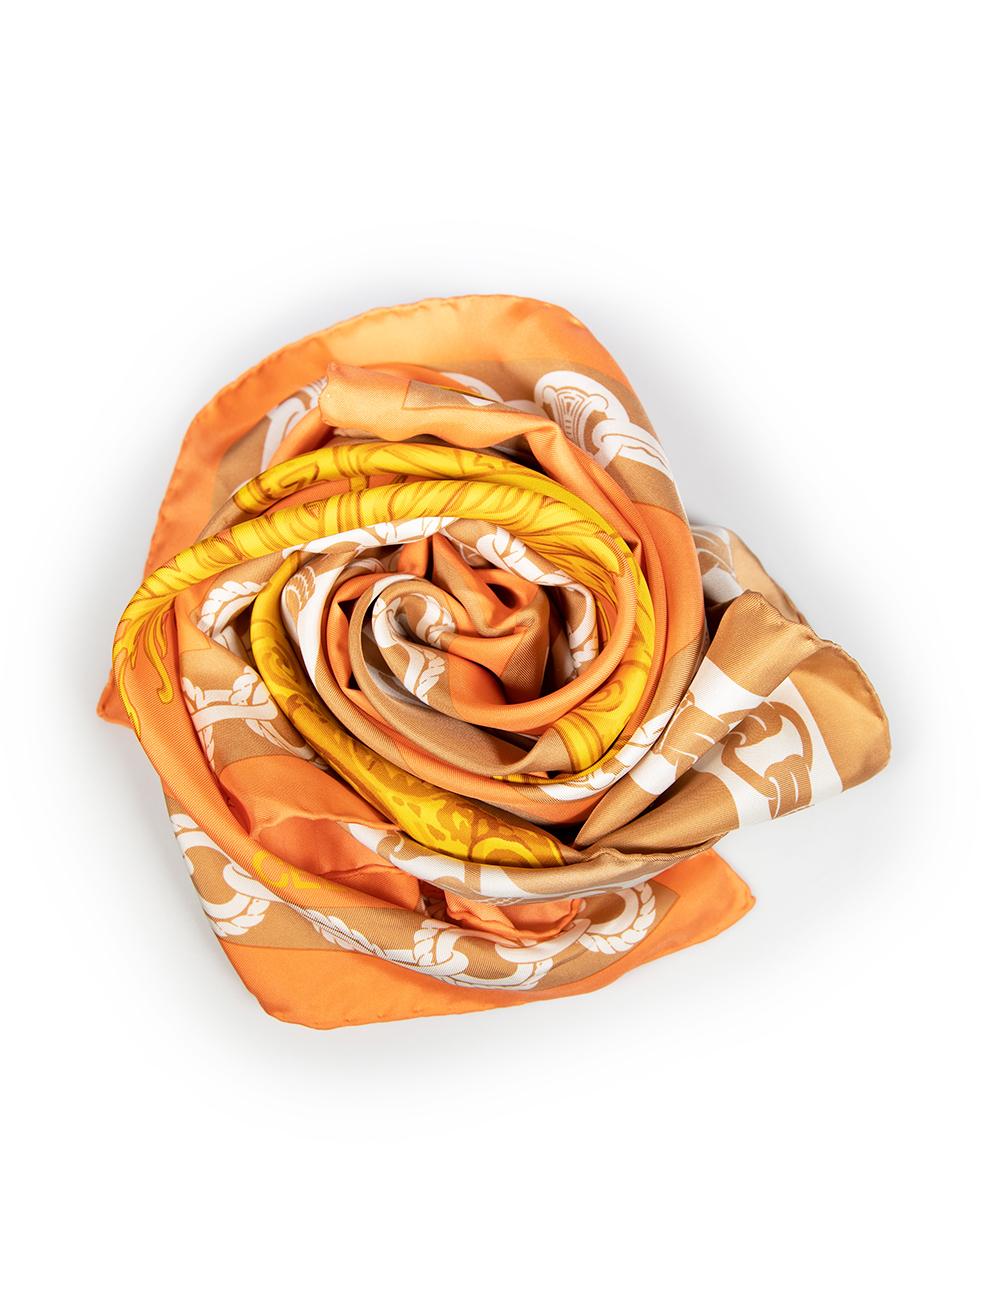 CONDITION is Very good. Minimal wear to scarf is evident. Minimal wear near the edge with a pull to the weave on this used Celine designer resale item
 
 
 
 Details
 
 
 Multicolour- Orange and brown
 
 Silk
 
 Square scarf
 
 Triomphe graphic